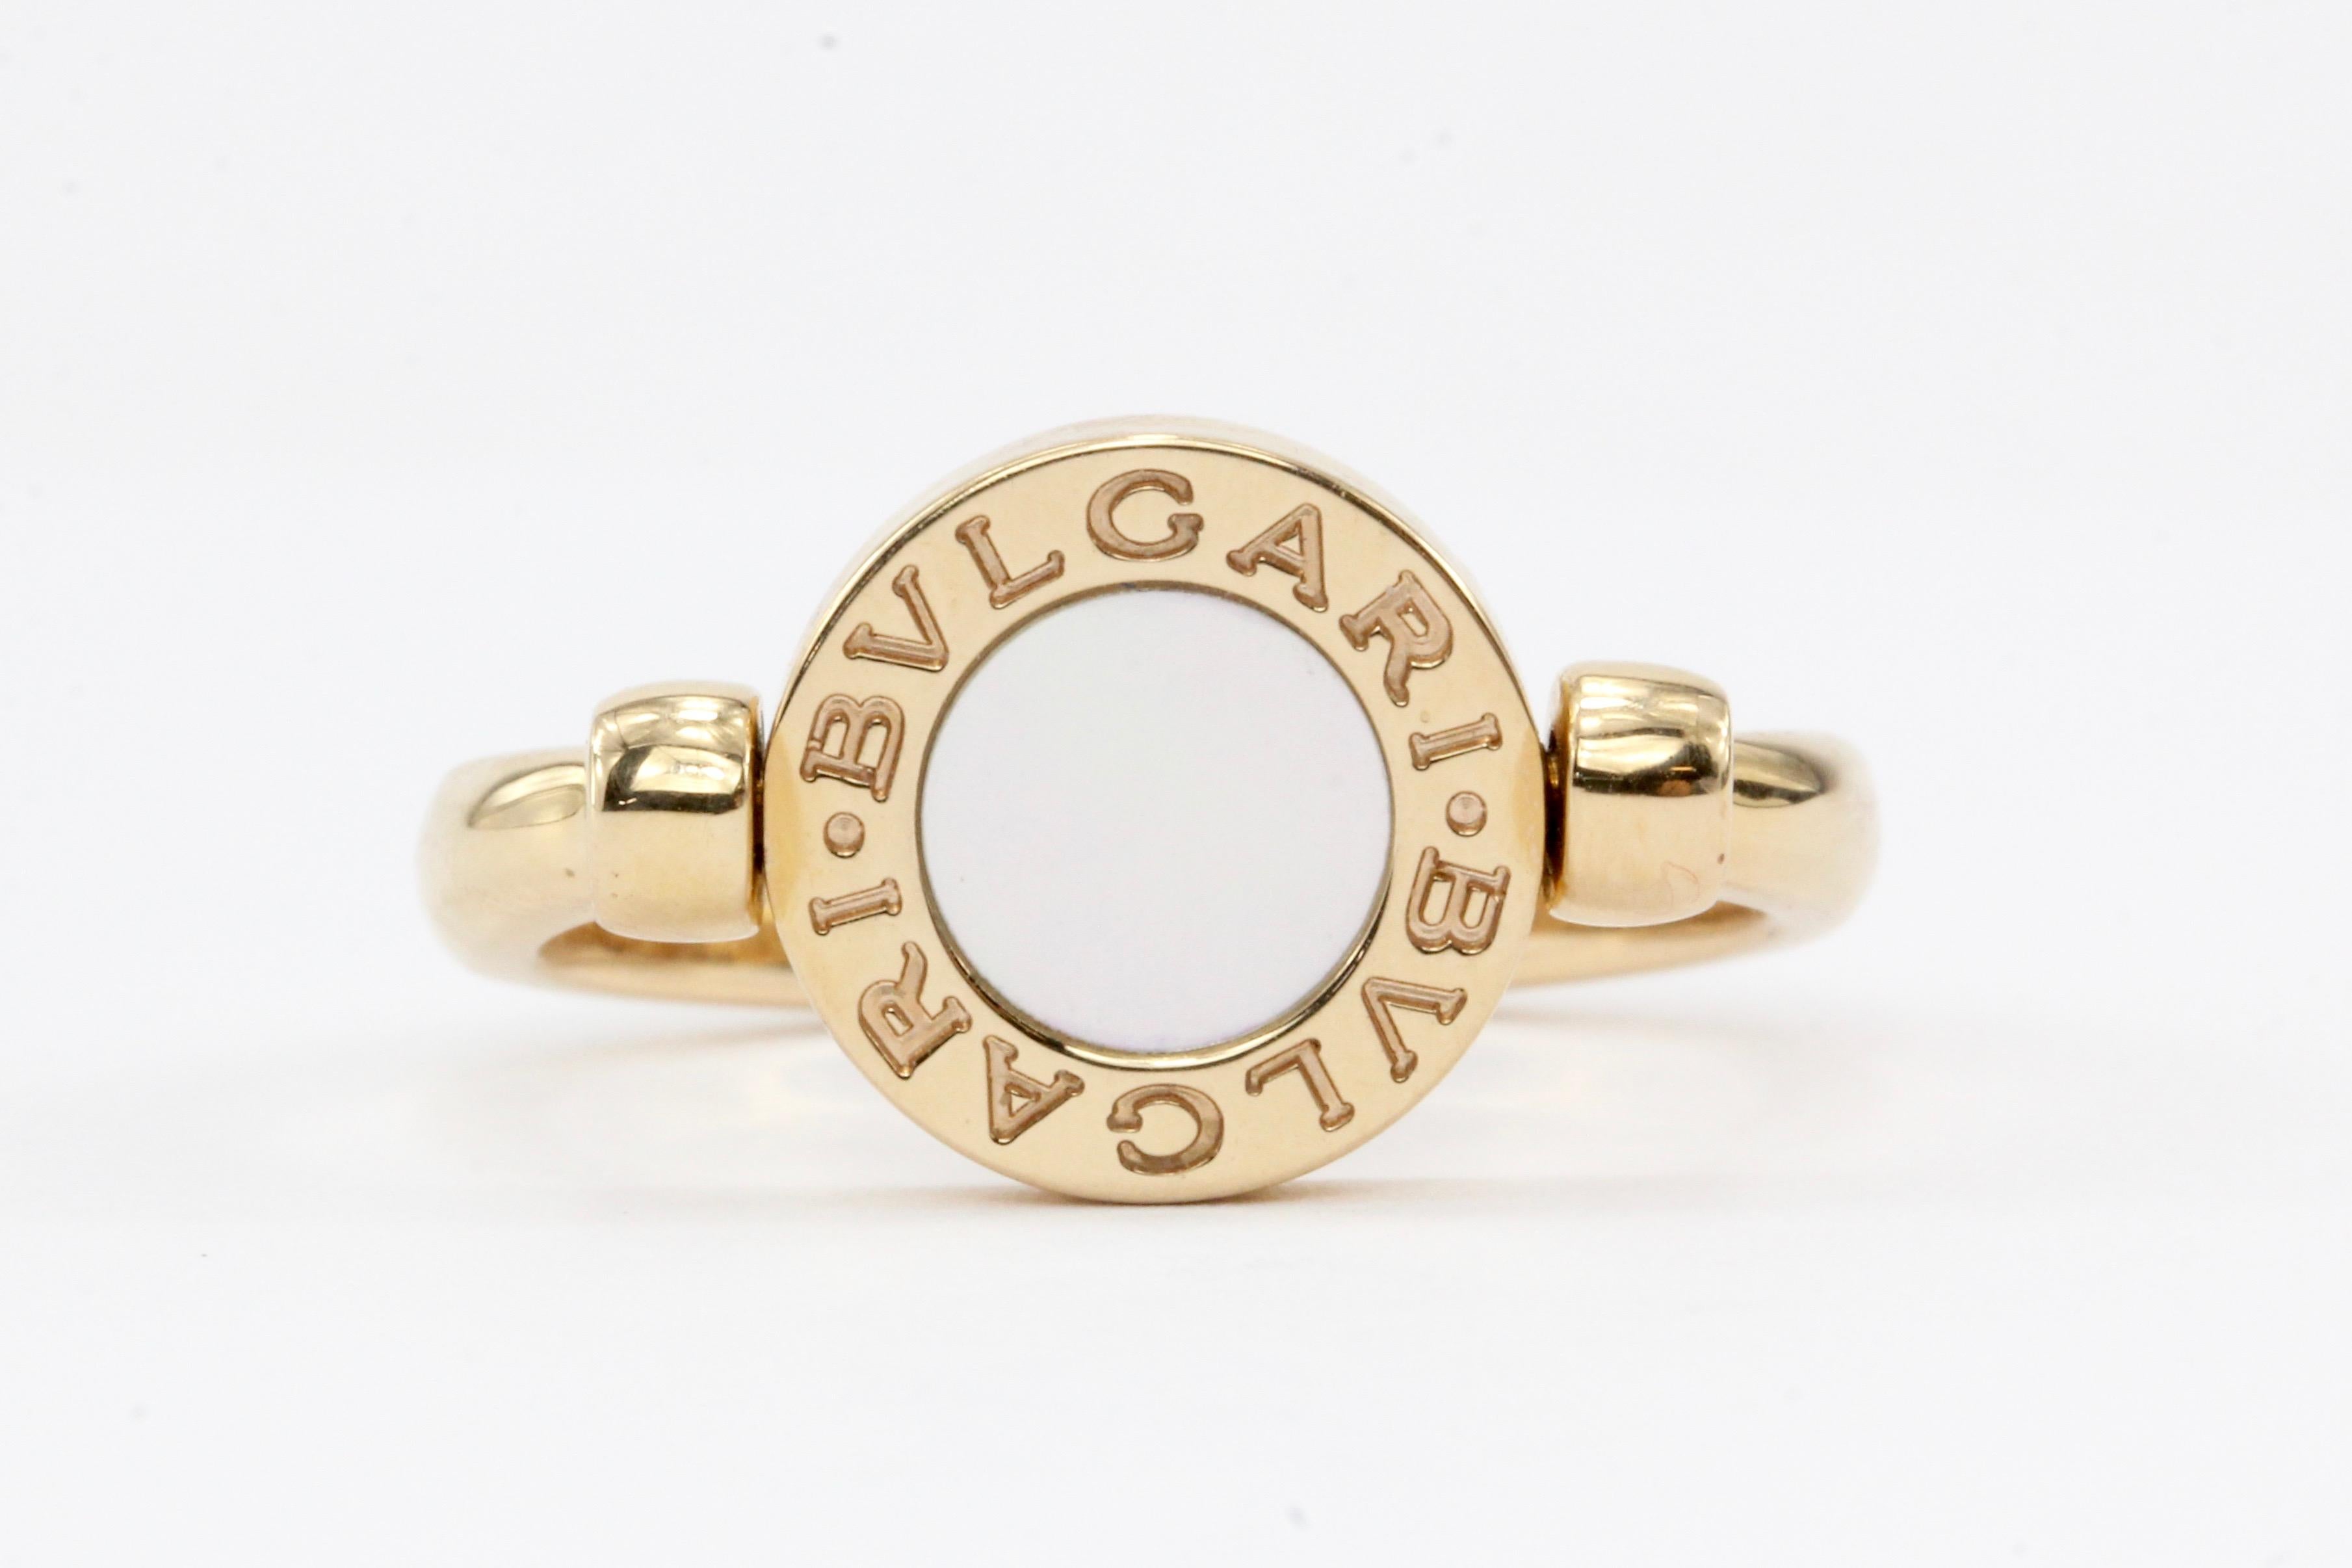 Era: Modern

Hallmarks: BVLGARI, AV, 750, 2341AL

Composition: 18K ROSE GOLD

Primary Stone: Diamonds

Shape: Rounds

Accent Stone: Mother of Pearl

Total Diamond Weight:

Ring Width: 10.93mm

Rise Above Finger: 4.02mm

Ring Size: 54 (size 7)

Ring